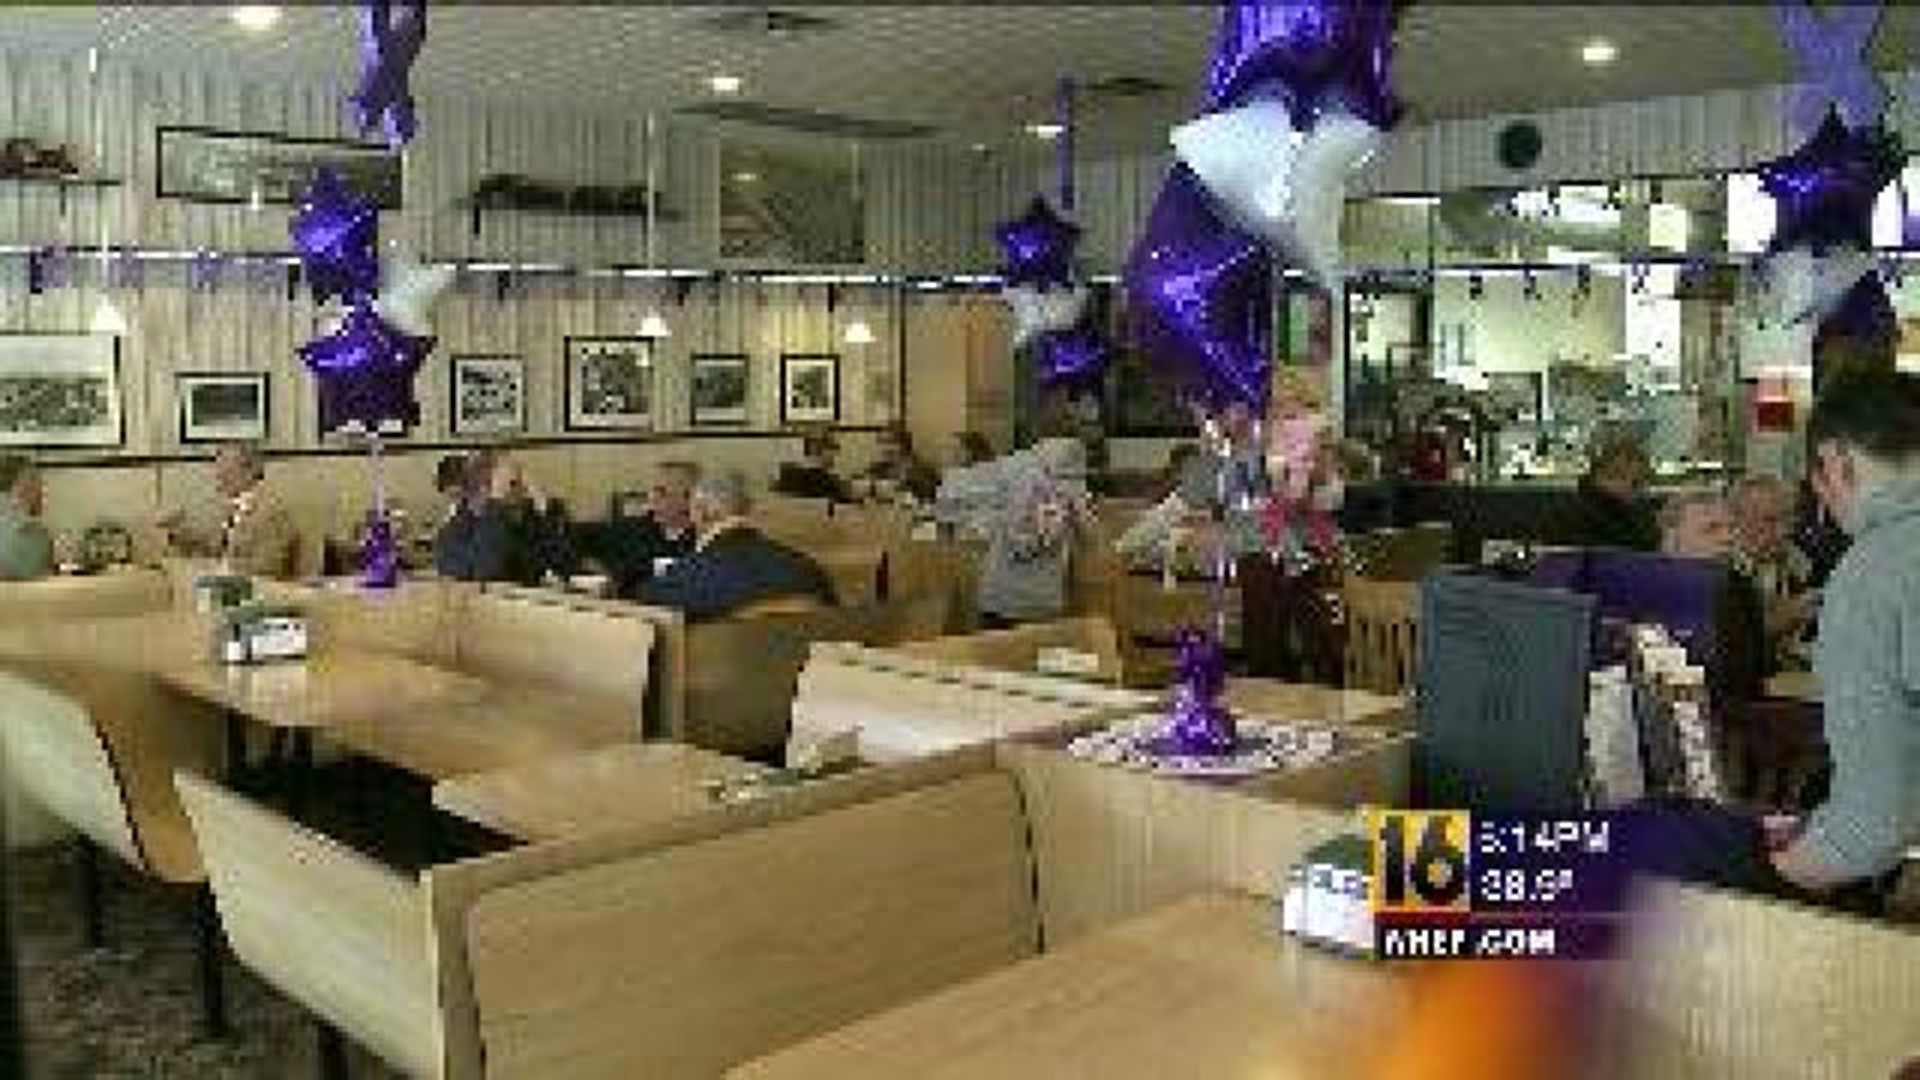 Pizza By Pappas Raises Funds for Pancreatic Cancer